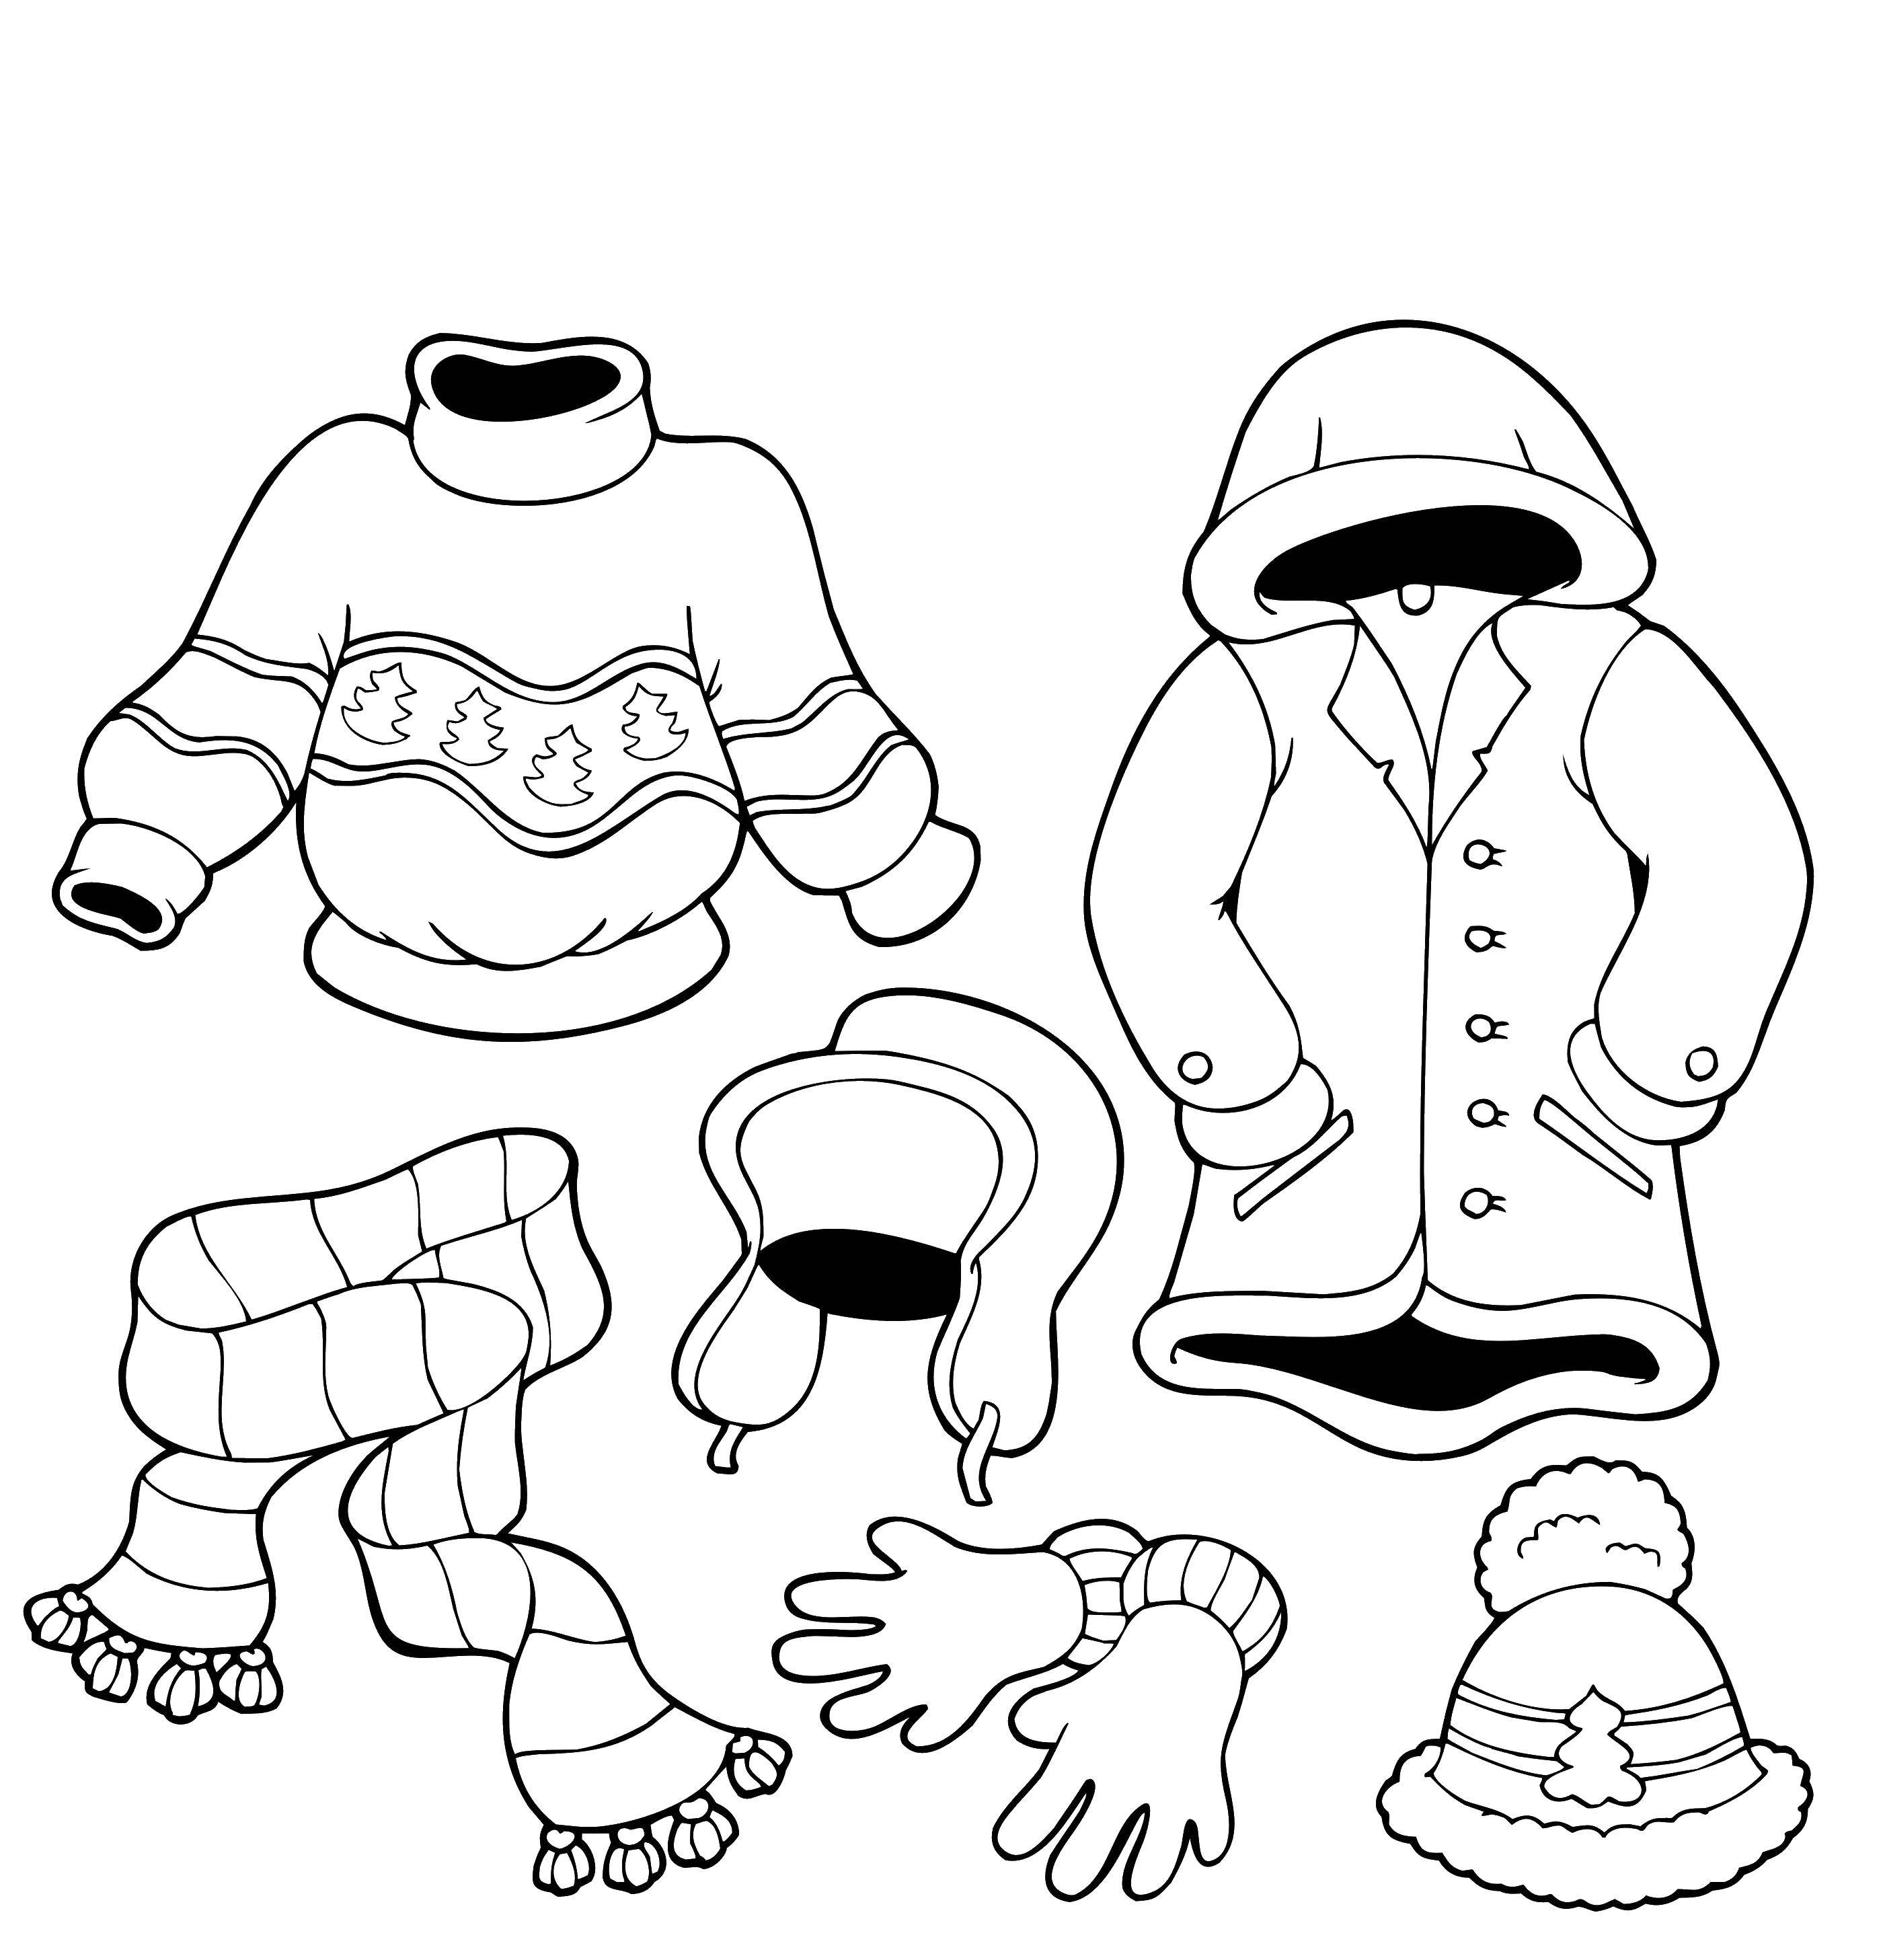 Coloring Winter clothes. Category coloring winter. Tags:  winter, winter clothes.